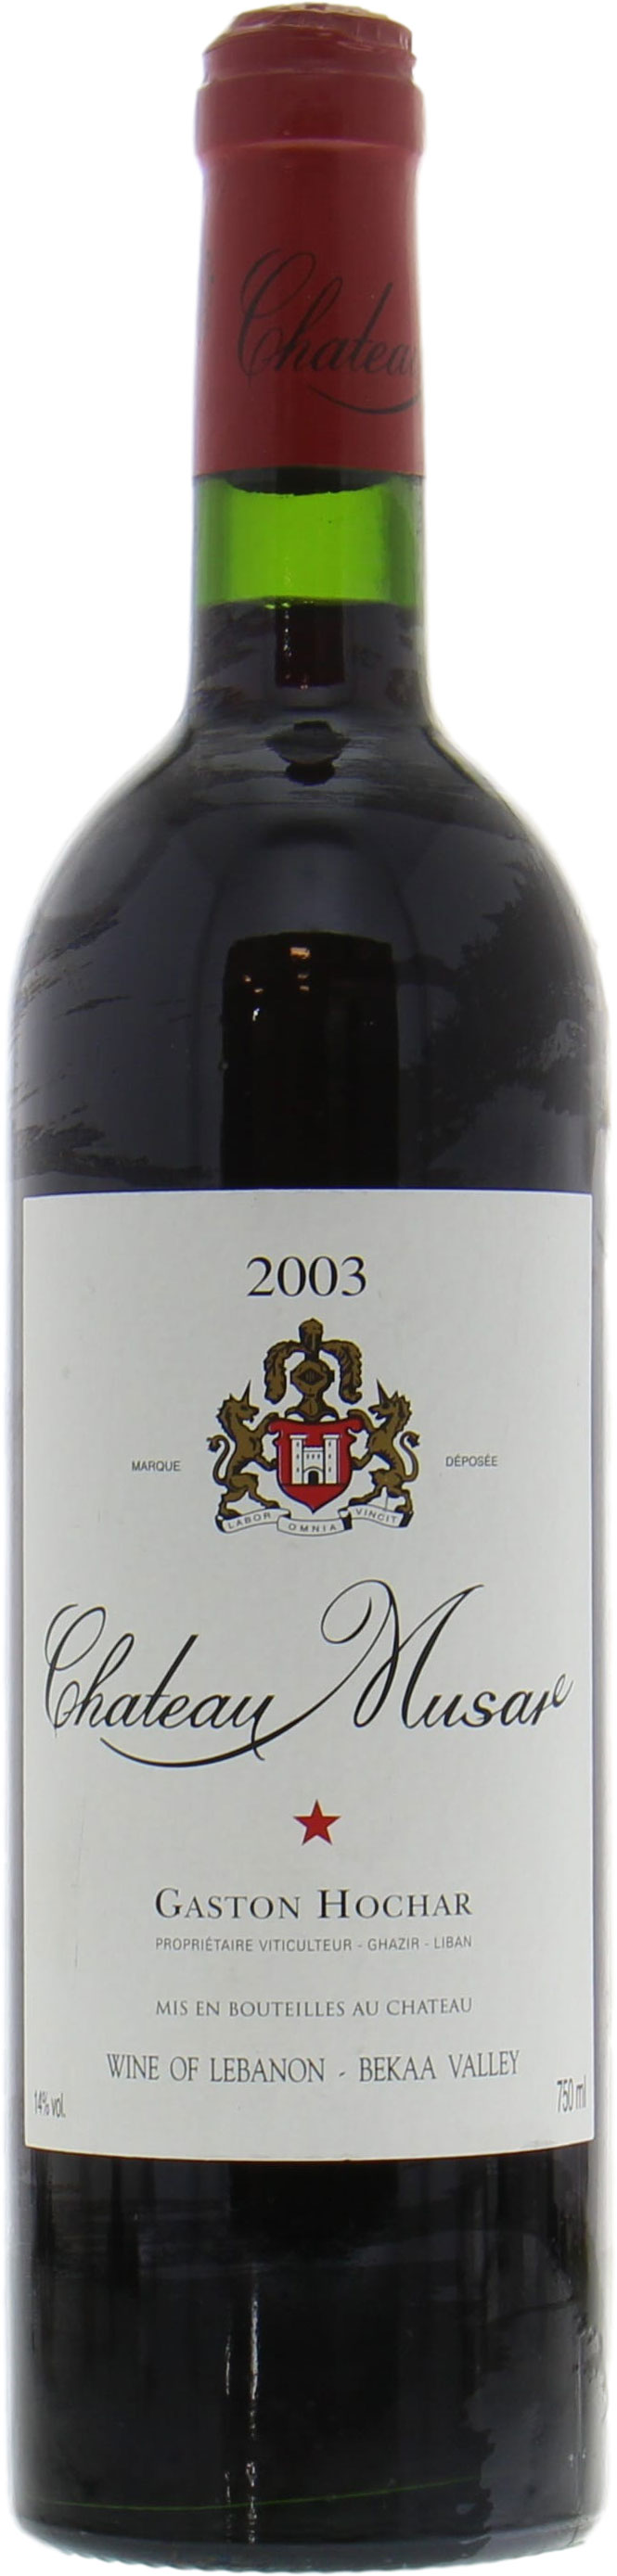 Chateau Musar - Chateau Musar release 2021 2003 Perfect